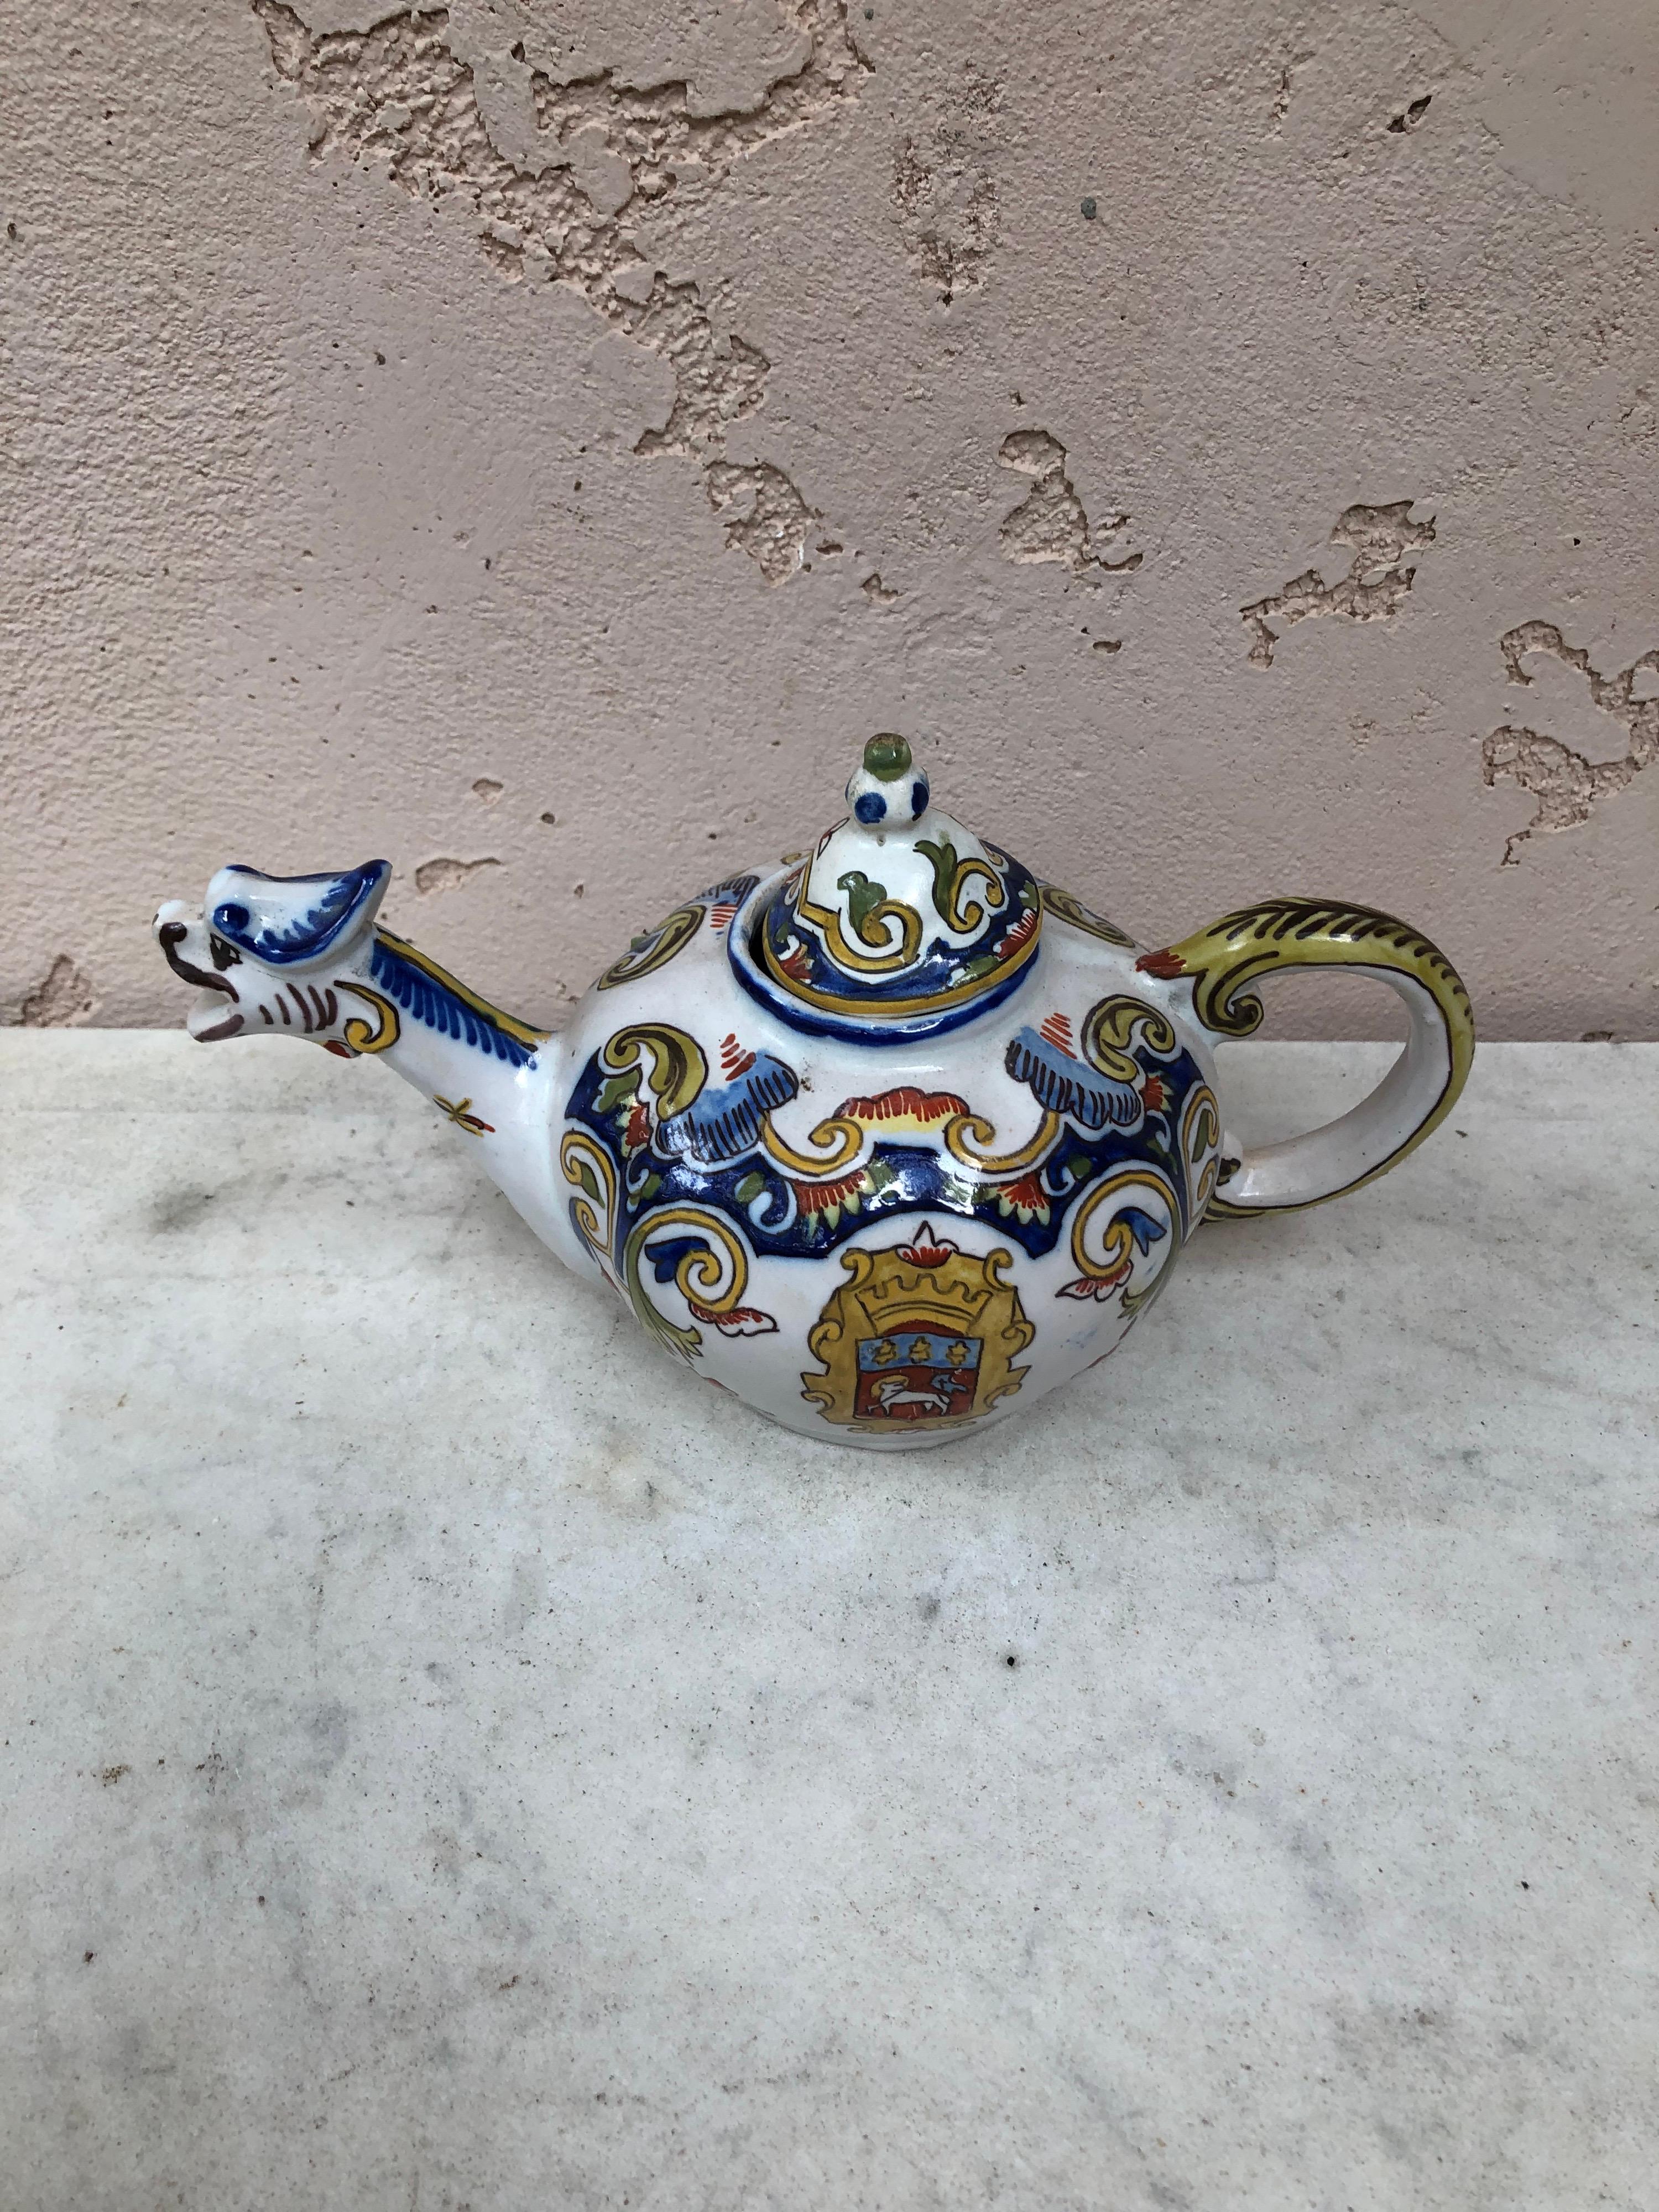 French Faience teapot Desvres, Rouen style Circa 1900.
Coat of arms and floral pattern.